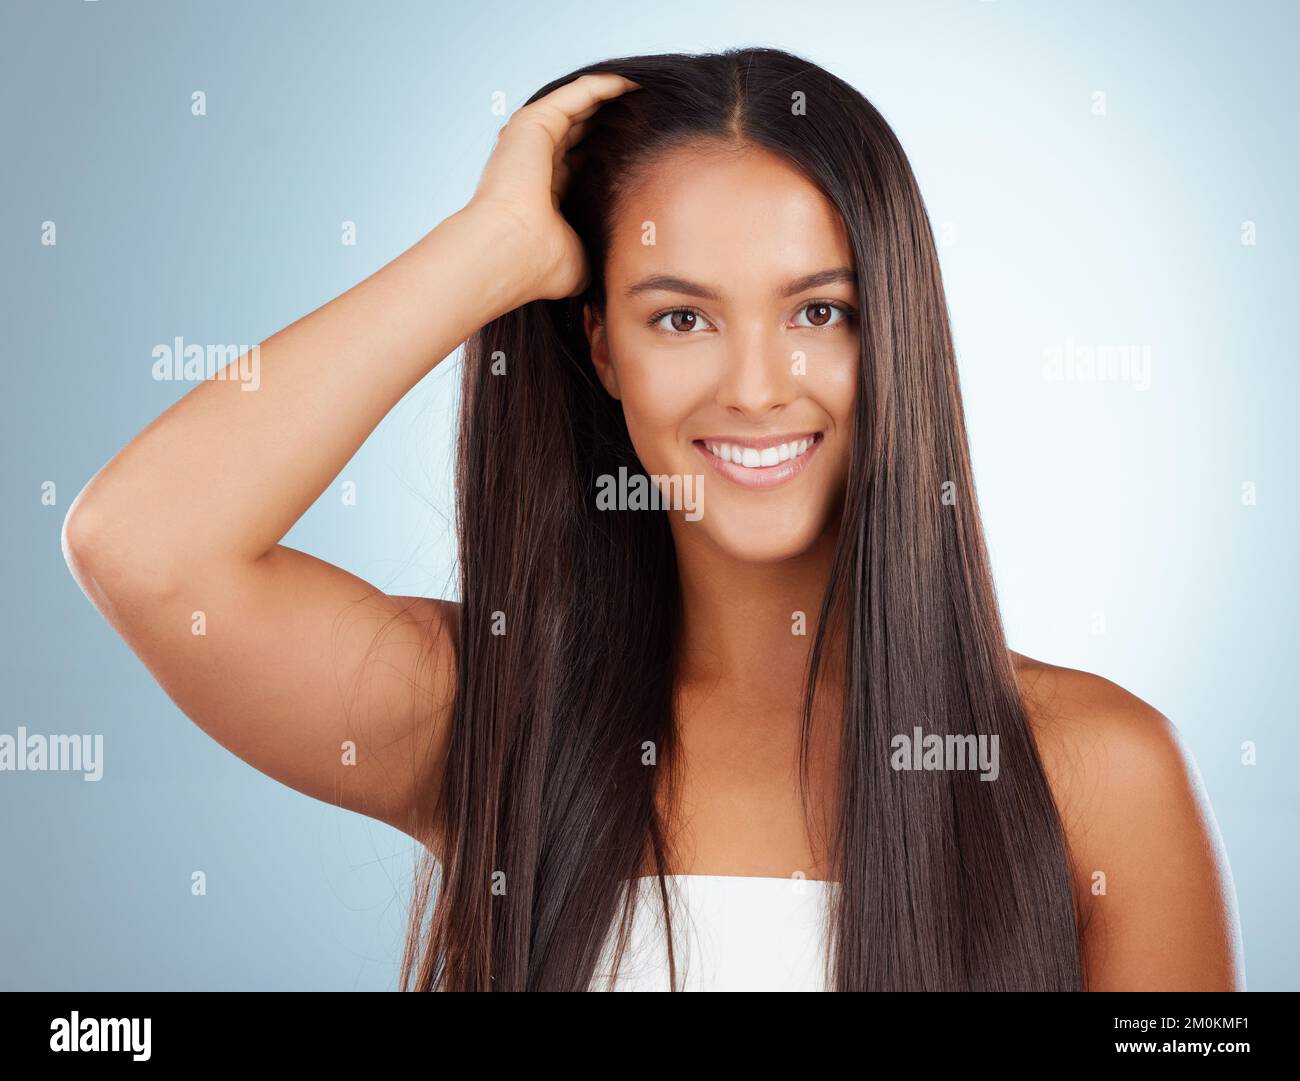 Portrait of a hispanic brunette woman with long lush beautiful hair smiling and posing against a grey studio background. Mixed race female standing Stock Photo